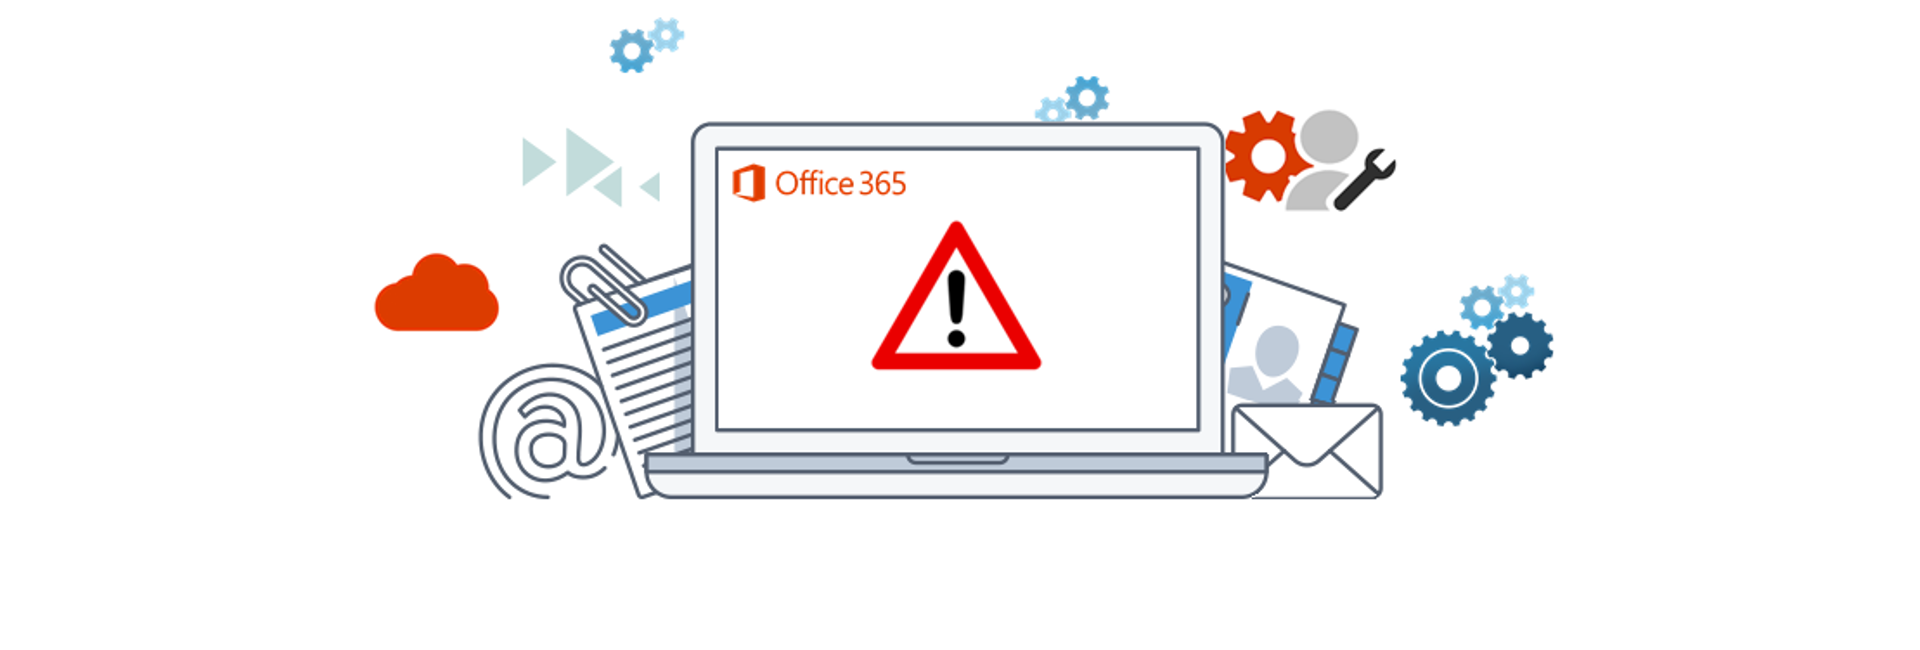 A PC with office 365 displaying on the monitor and a warning symbol indicating the environment has been compromises